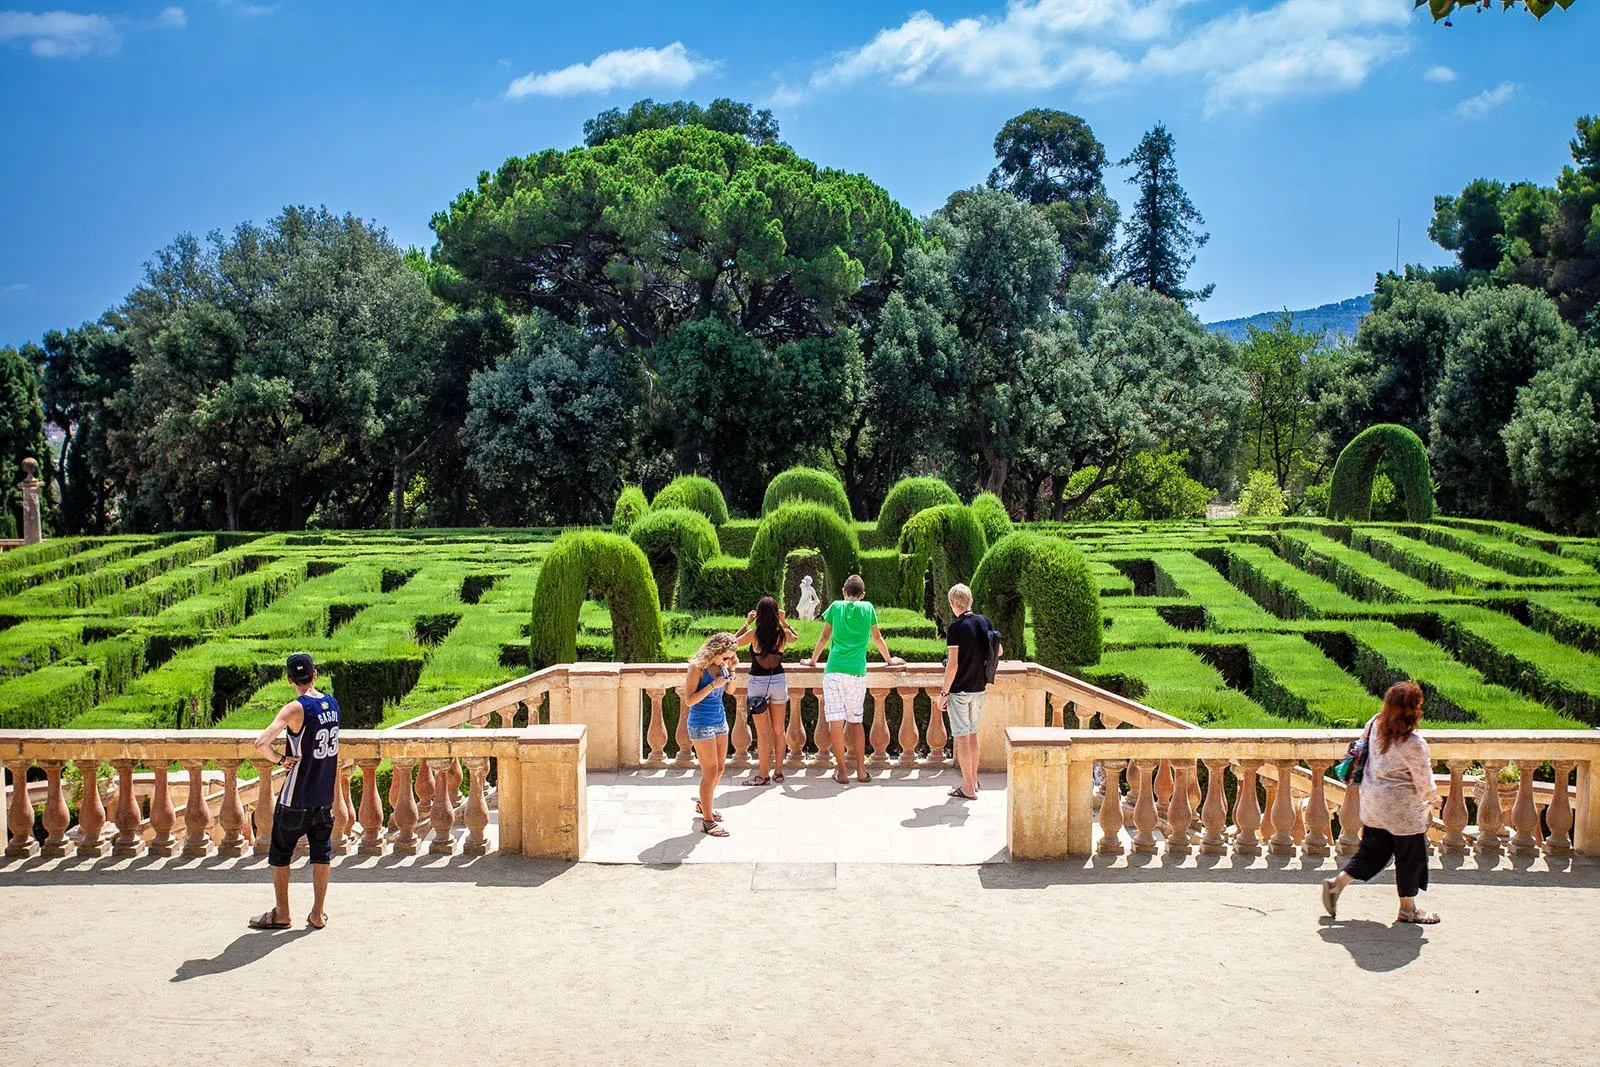 Orth's Labyrinth in Spain, Europe | Parks - Rated 3.8